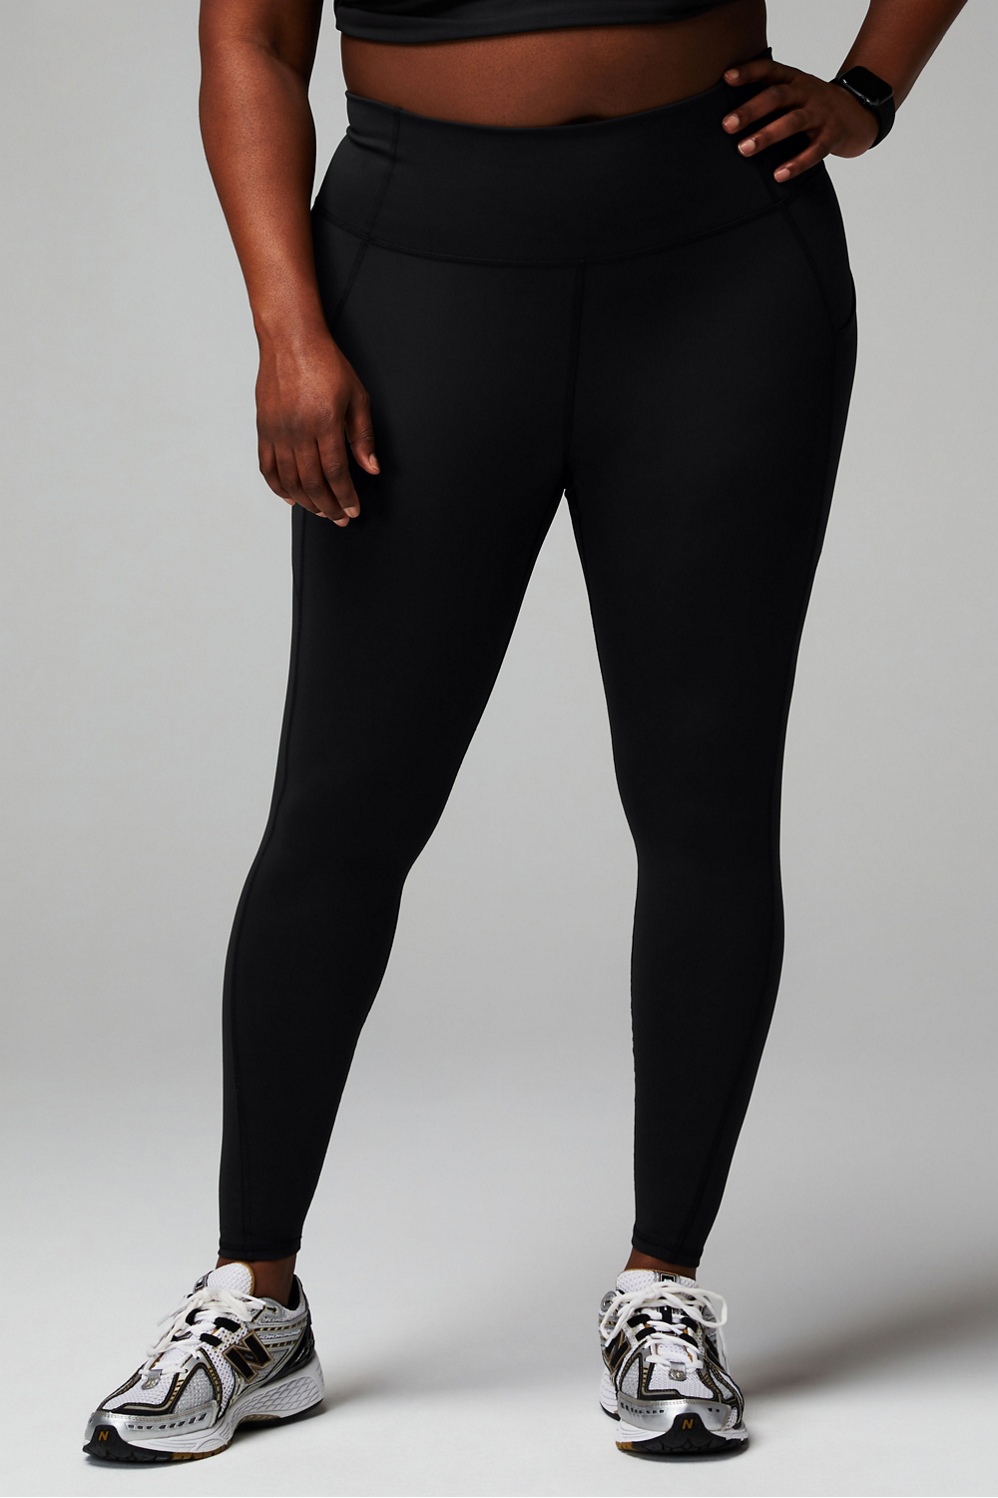 Black Leggings in Lagos for sale ▷ Prices on